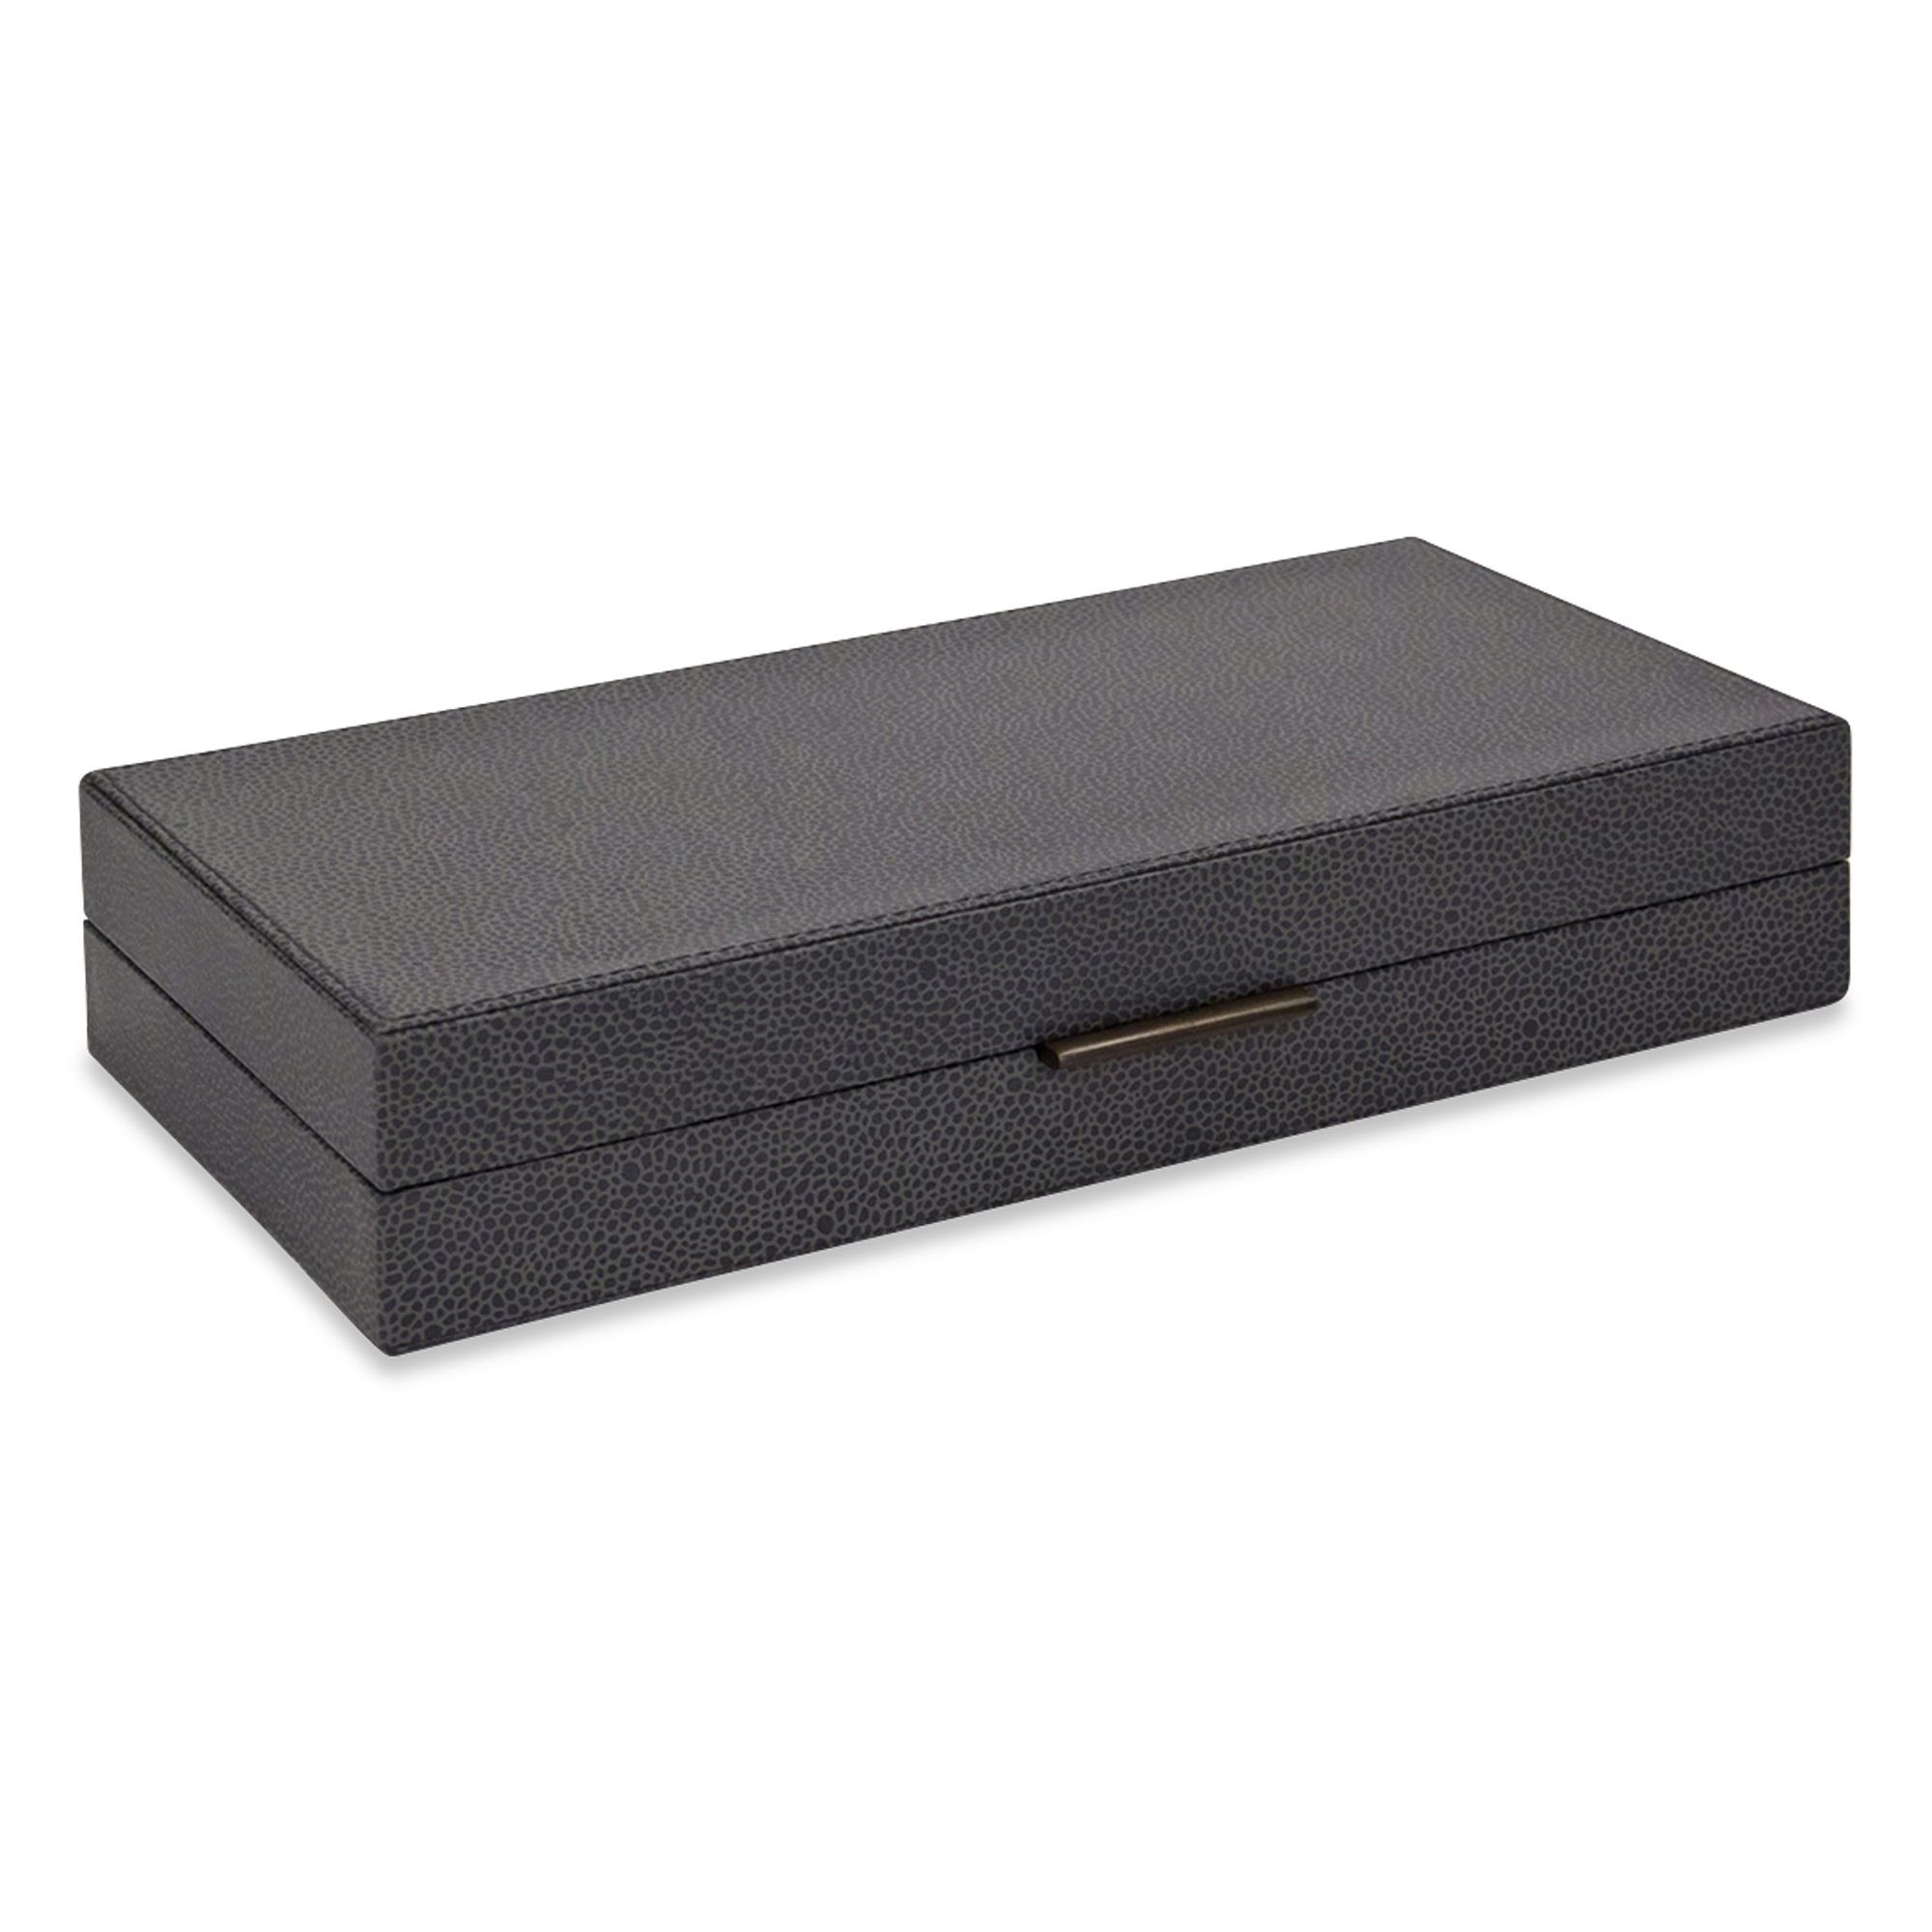 The perfect subtle graining of leather and understated bronze slim knobs provide fantastic complements for the stylish grey interior and smooth suede bases of these boxes.